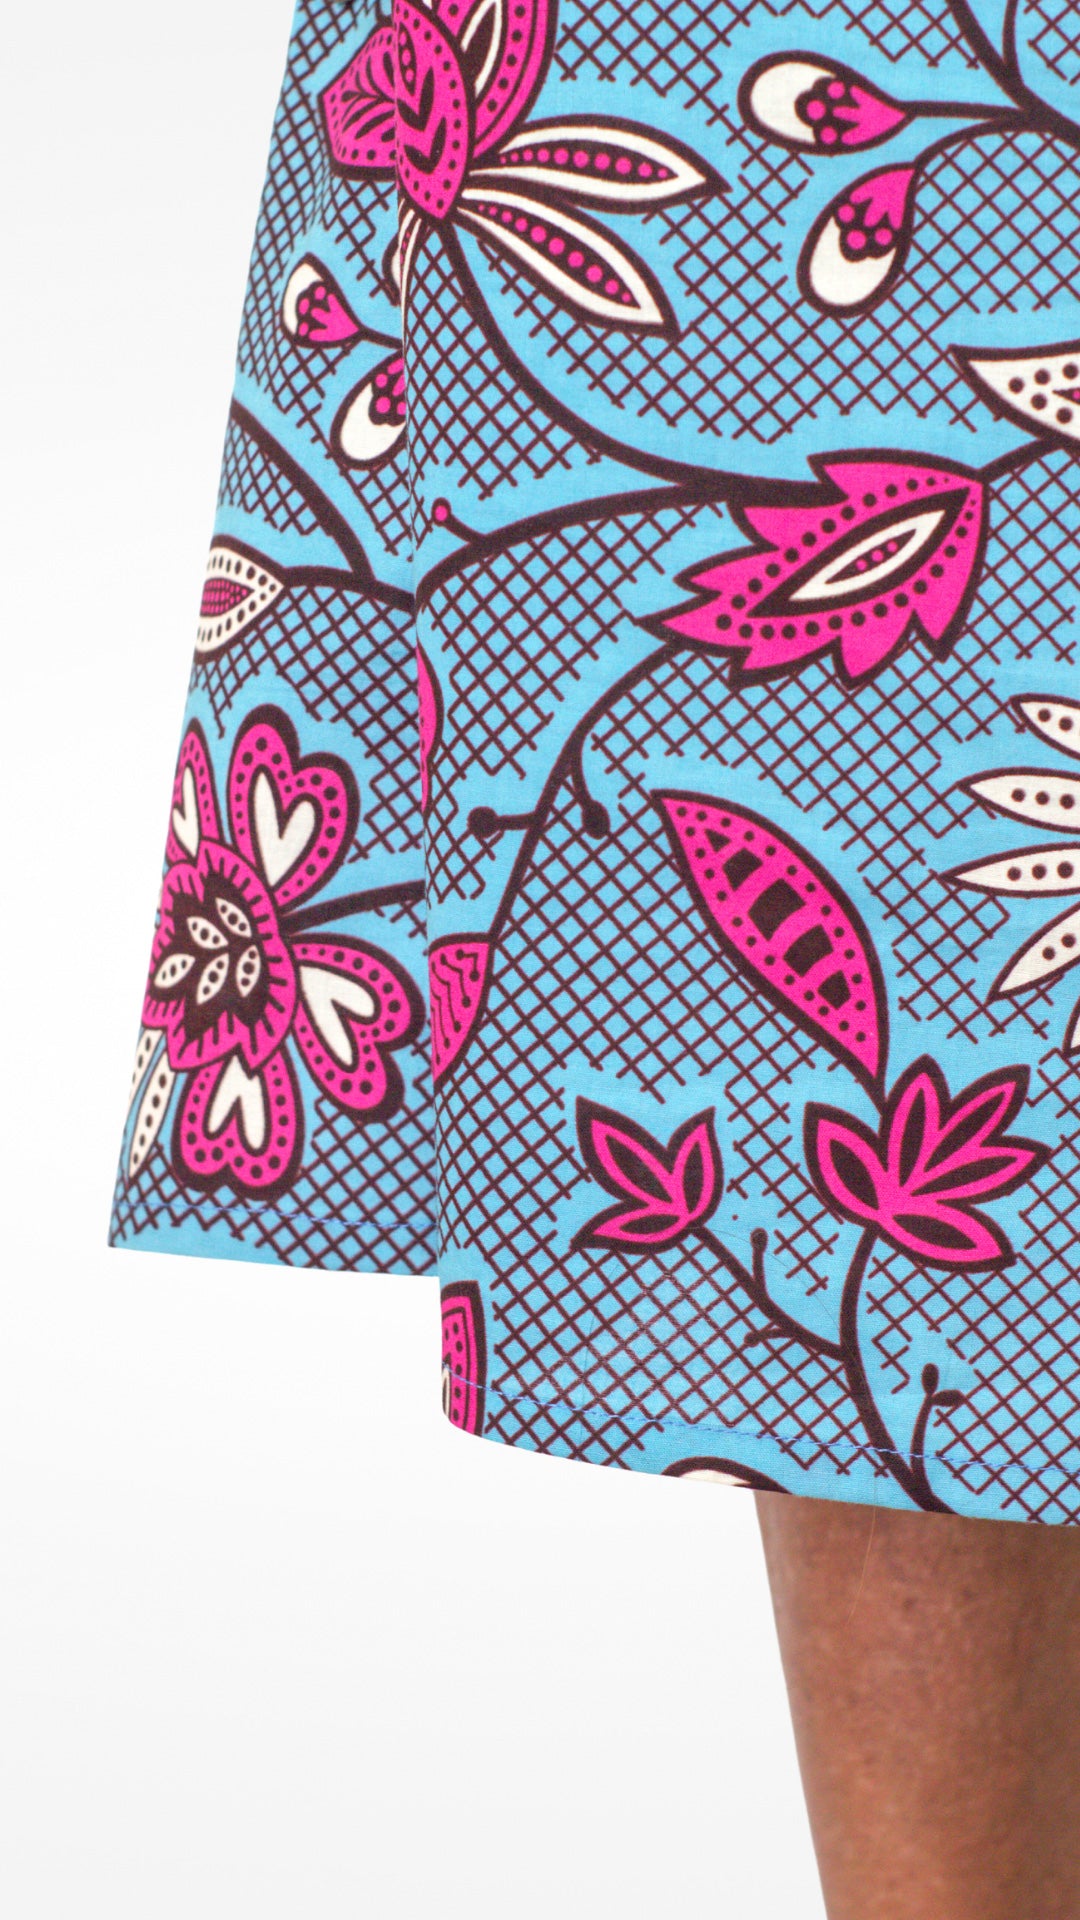 A close-up view focusing on the neckline of the blue print kaftan-style dress with pink elements, highlighting the fit and the high quality of the fabric.